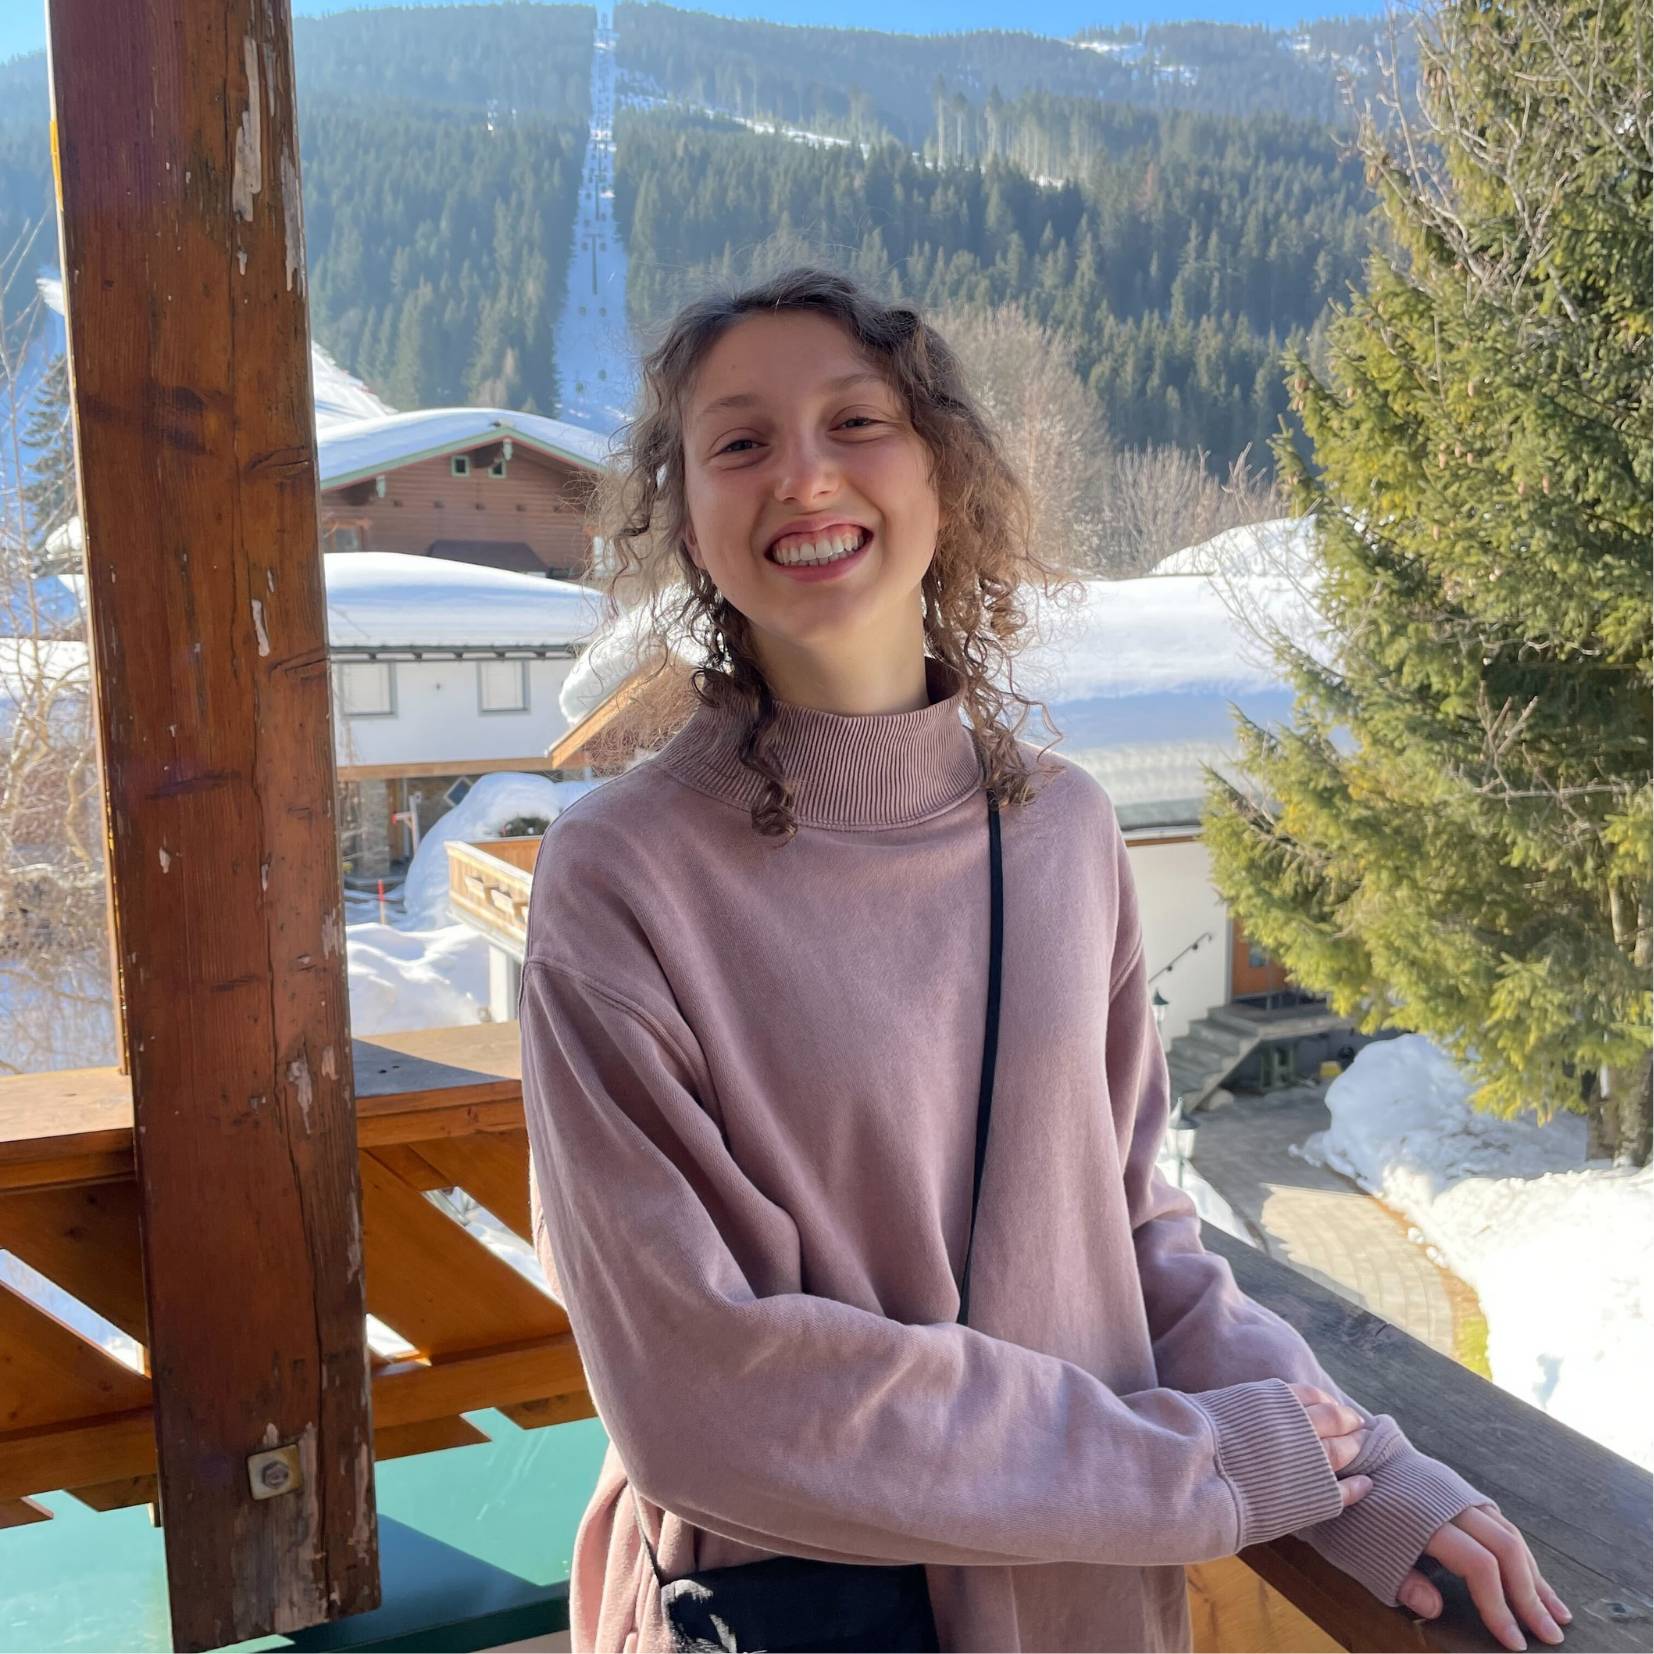 Image of a female smiling at the camera posing in front of a window overlooking a snow covered building and tree lined hill.